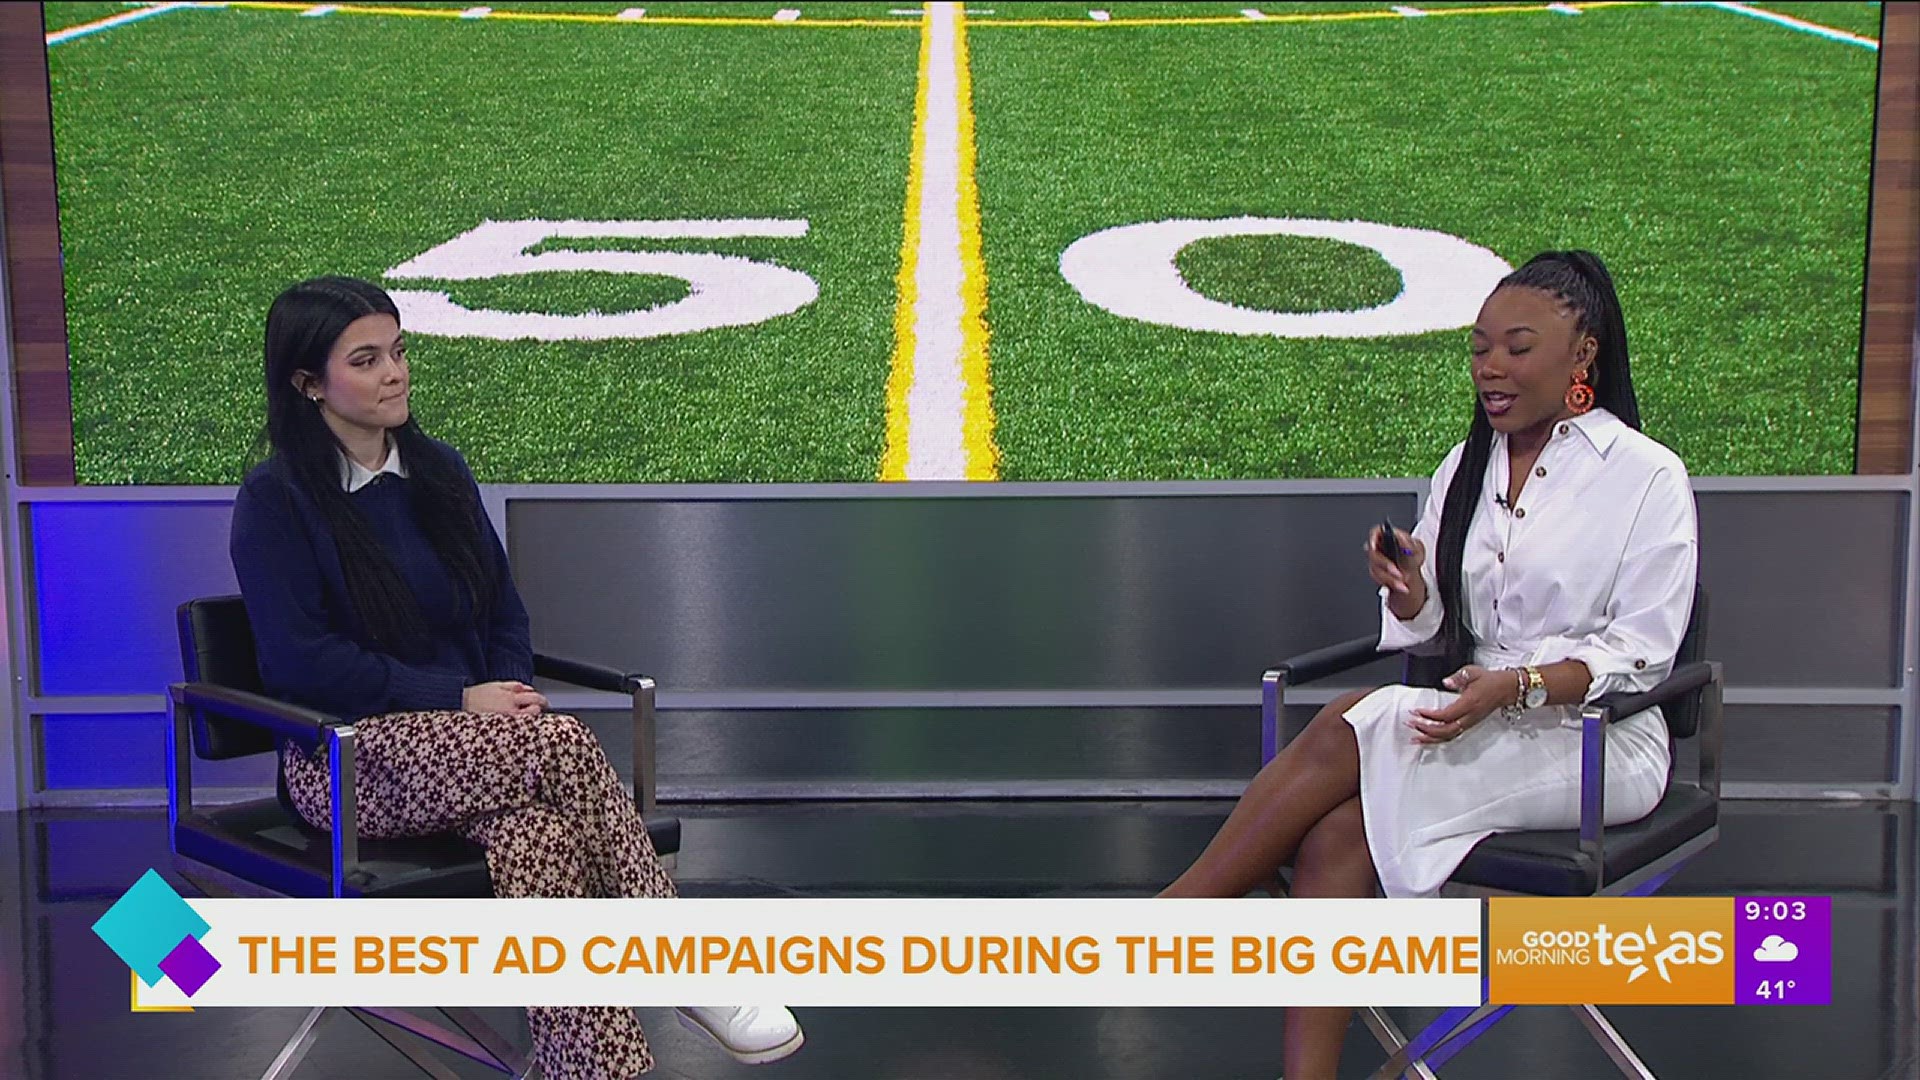 TRG brand creative and senior copywriter Grace Lam Green shares her top five ad campaigns shown during Sunday's big game